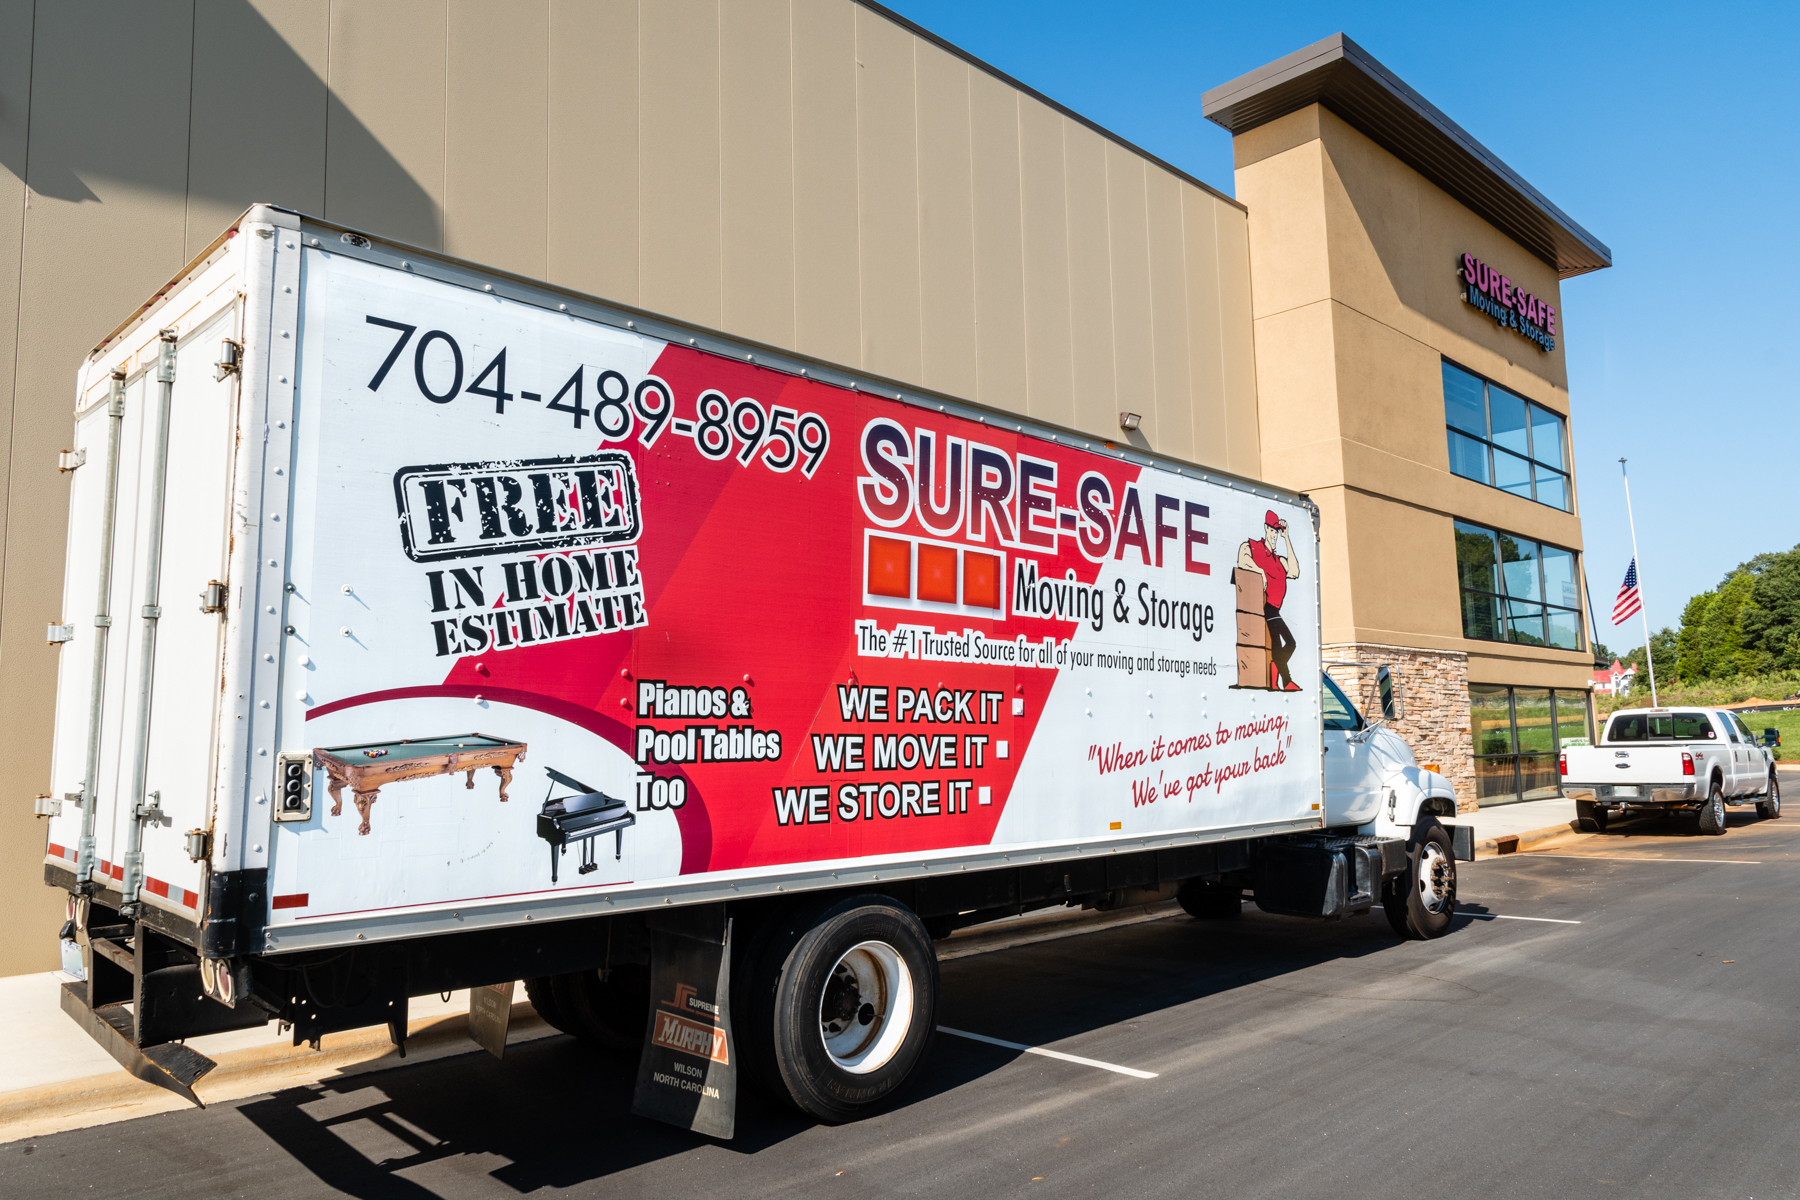 Sure-Safe Moving and Storage van